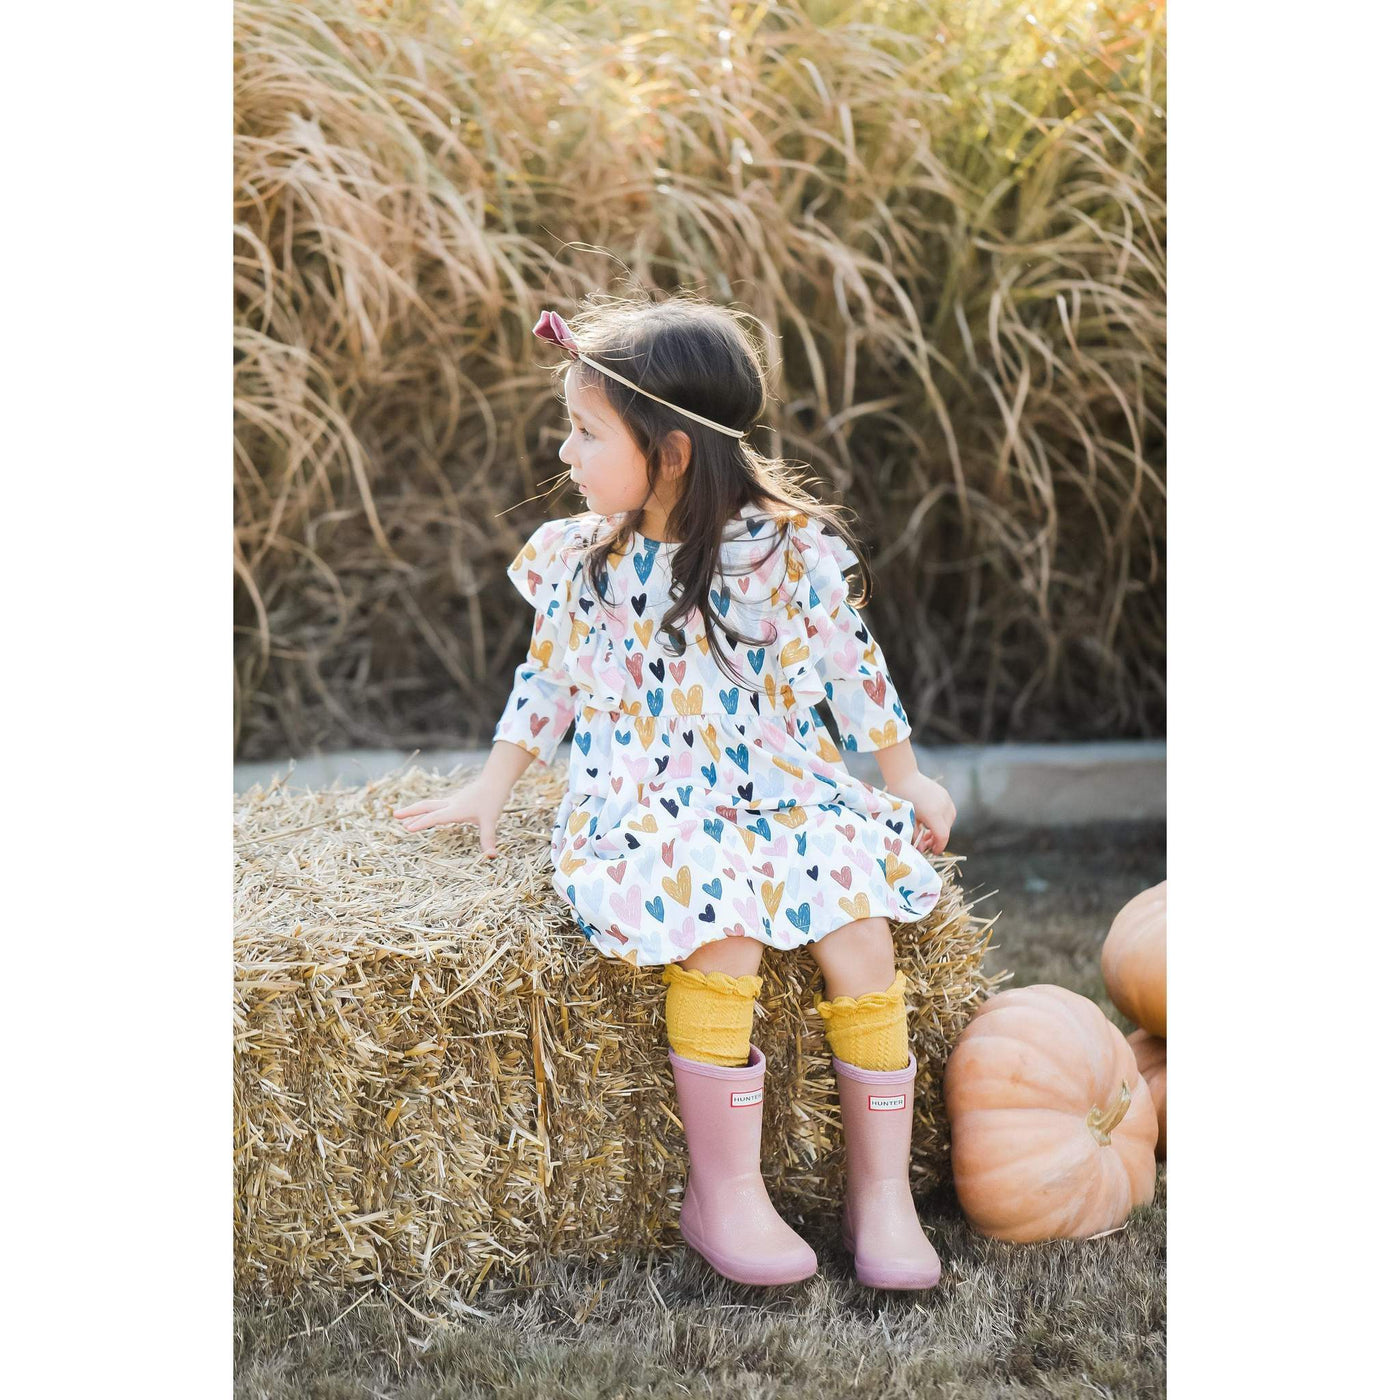 Stella Violet Boutique Girls Clothing! Shop Online with Stella Violet Boutique, where you will find some of the Trendiest Styles for Women and Kids. Located in Arvada, Colorado